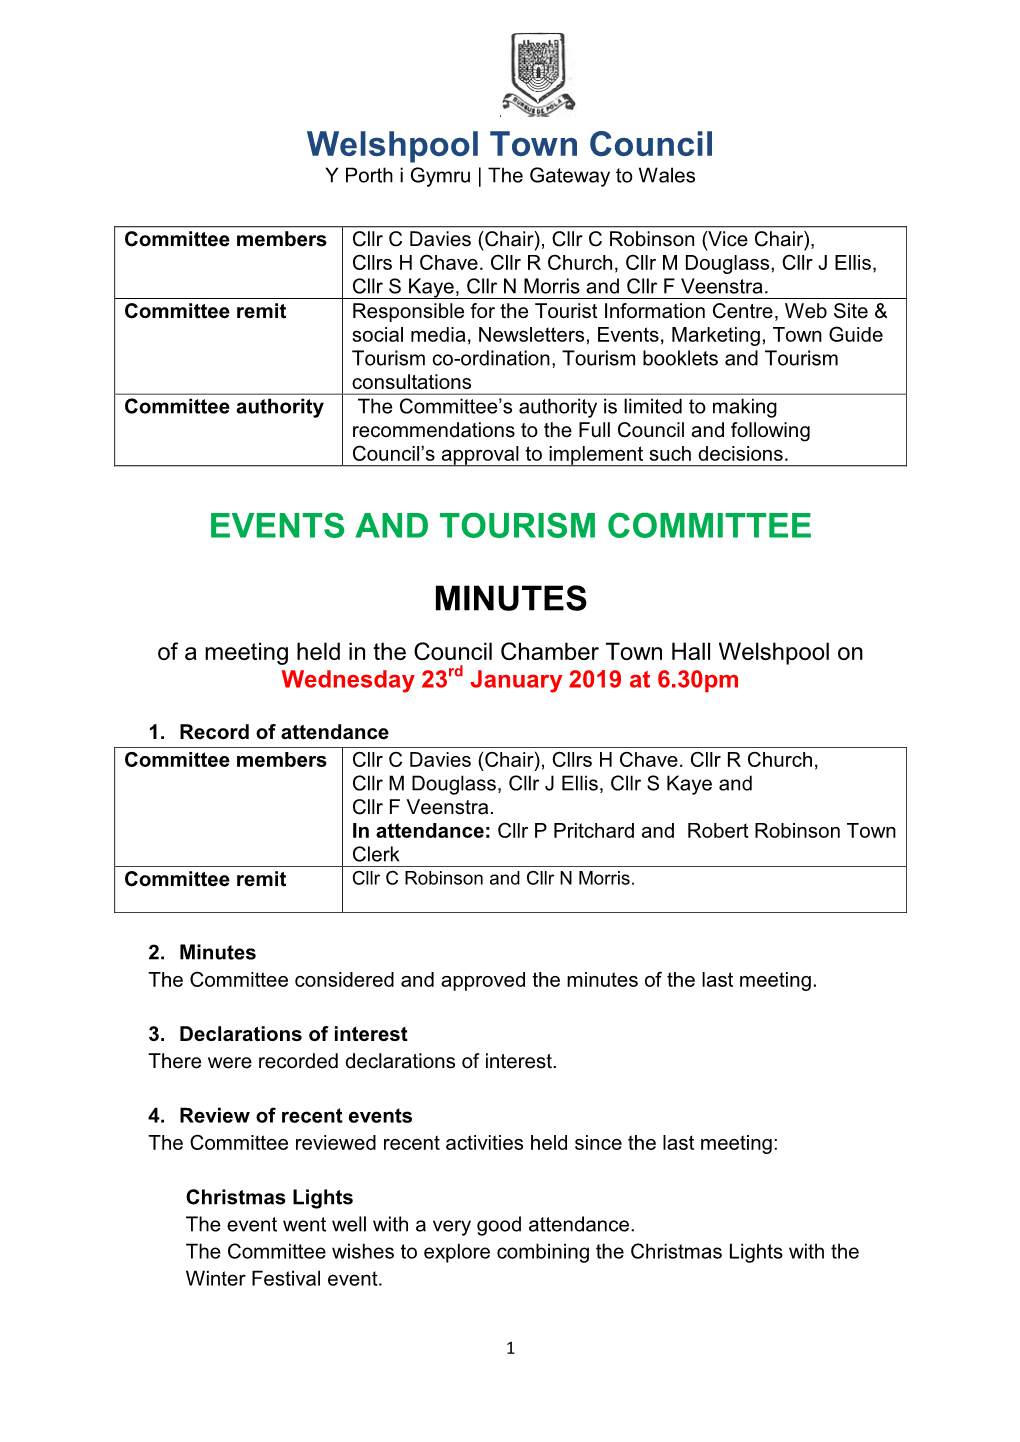 Welshpool Town Council EVENTS and TOURISM COMMITTEE